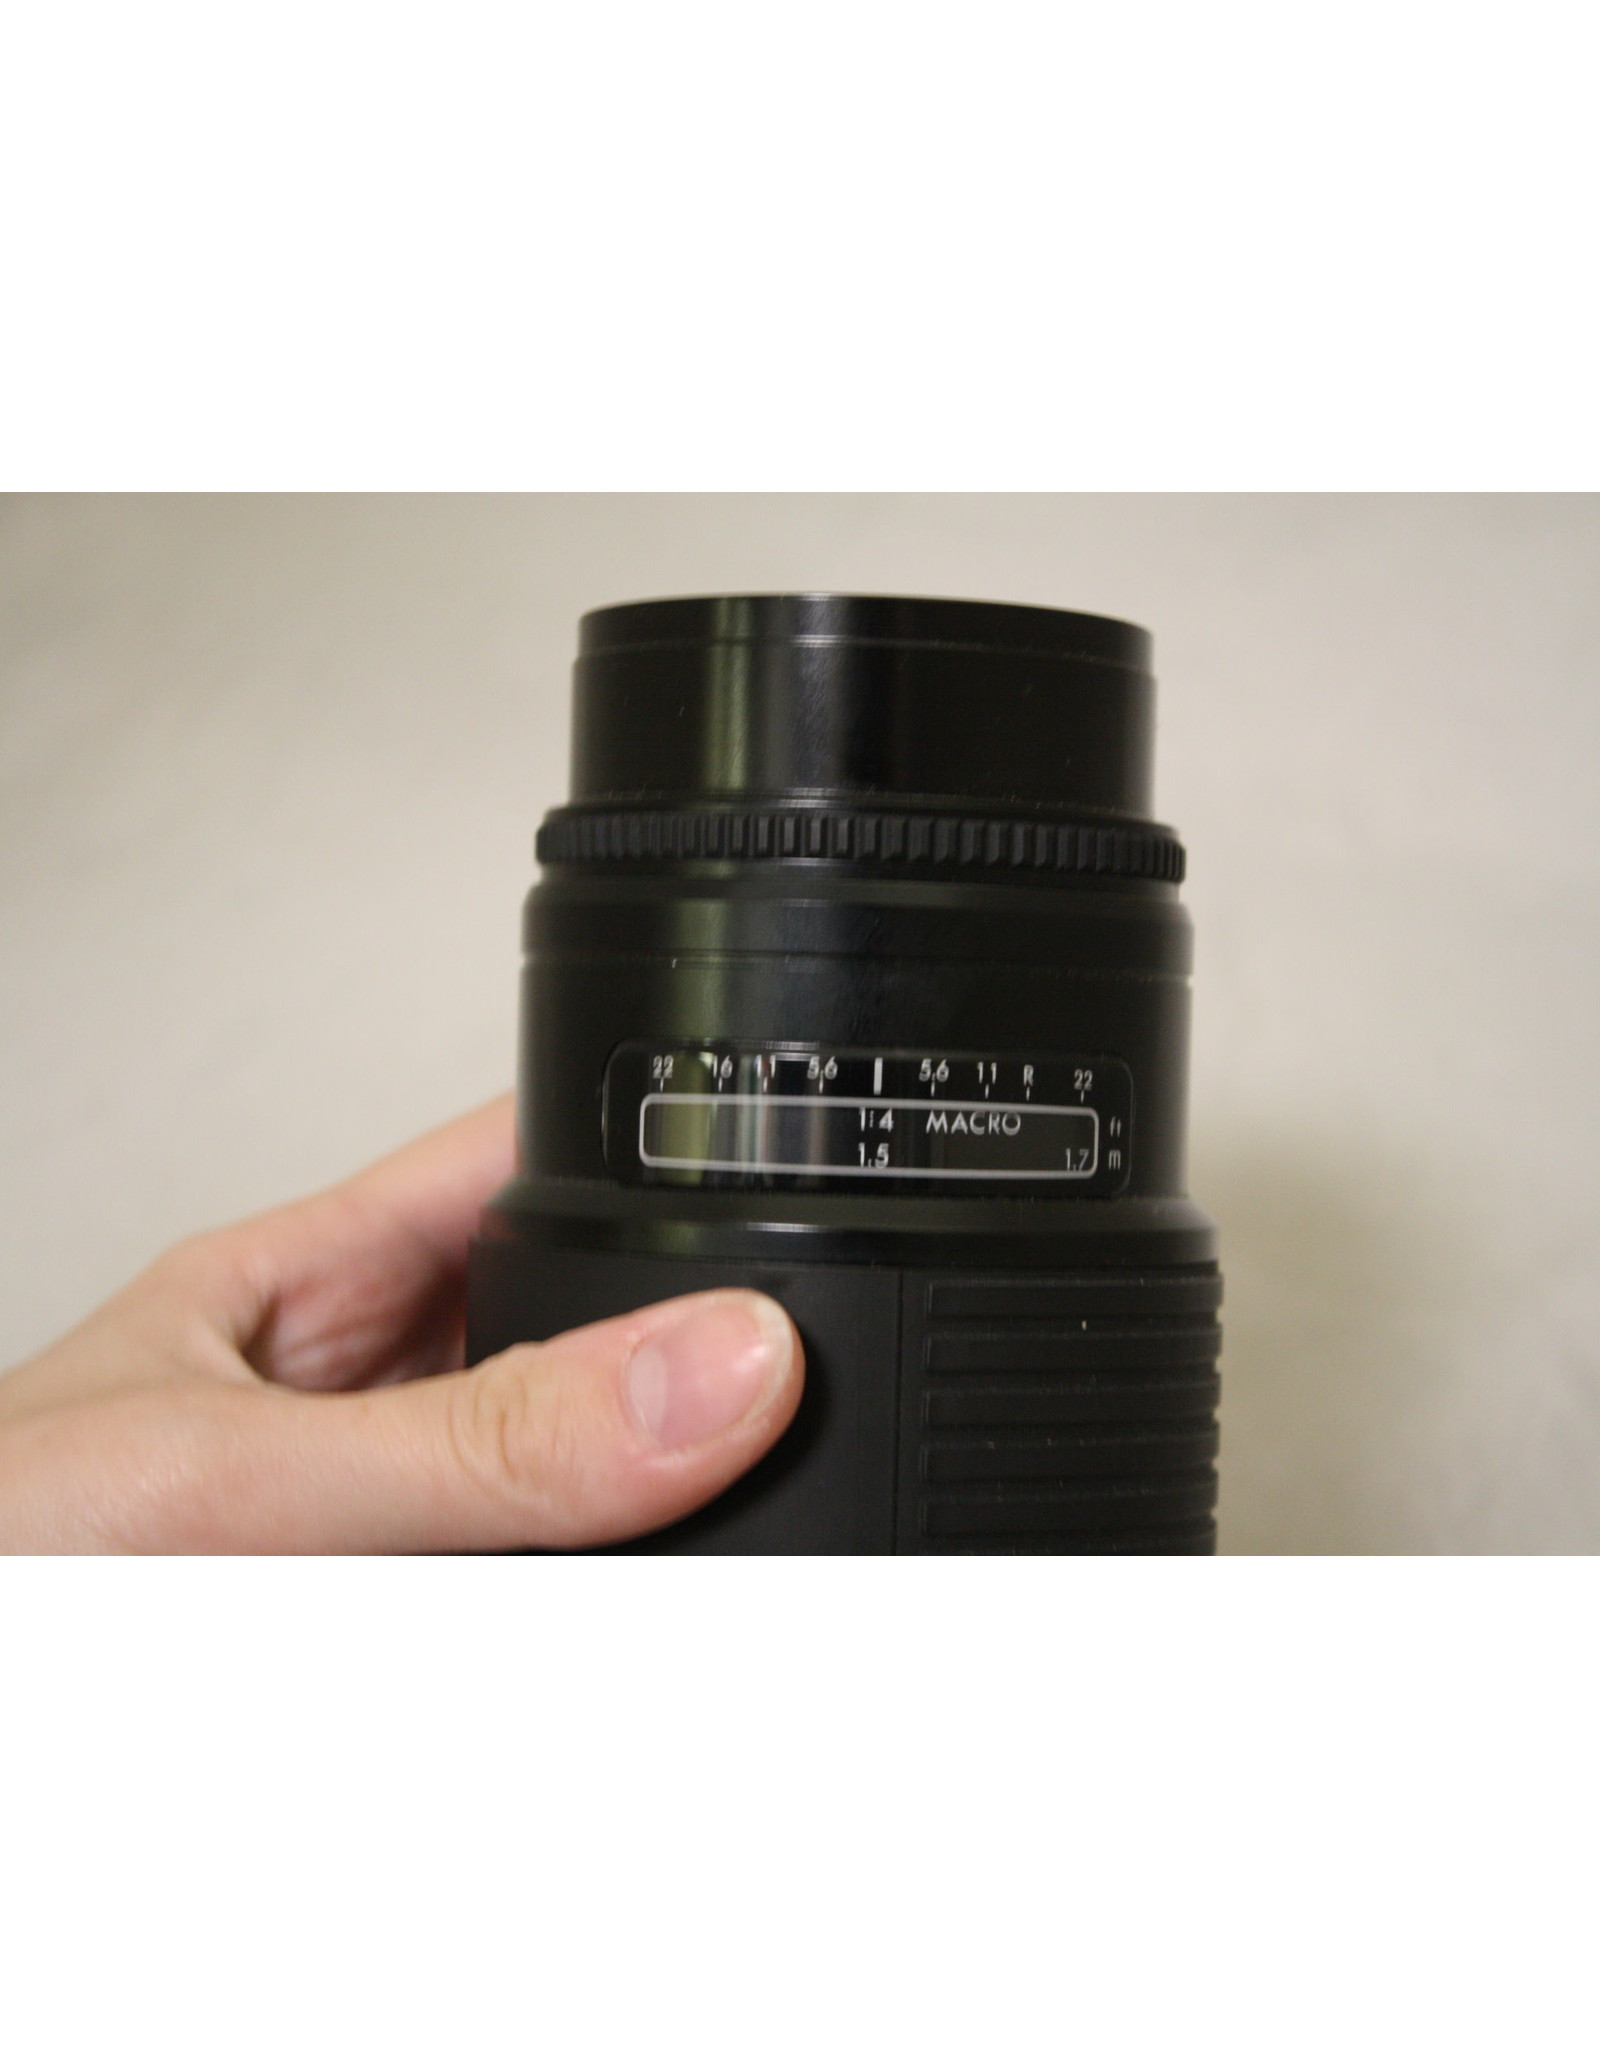 Sigma Sigma AF 75-300mm 4.5-5.6 for Sony/Maxxum (Pre-owned)